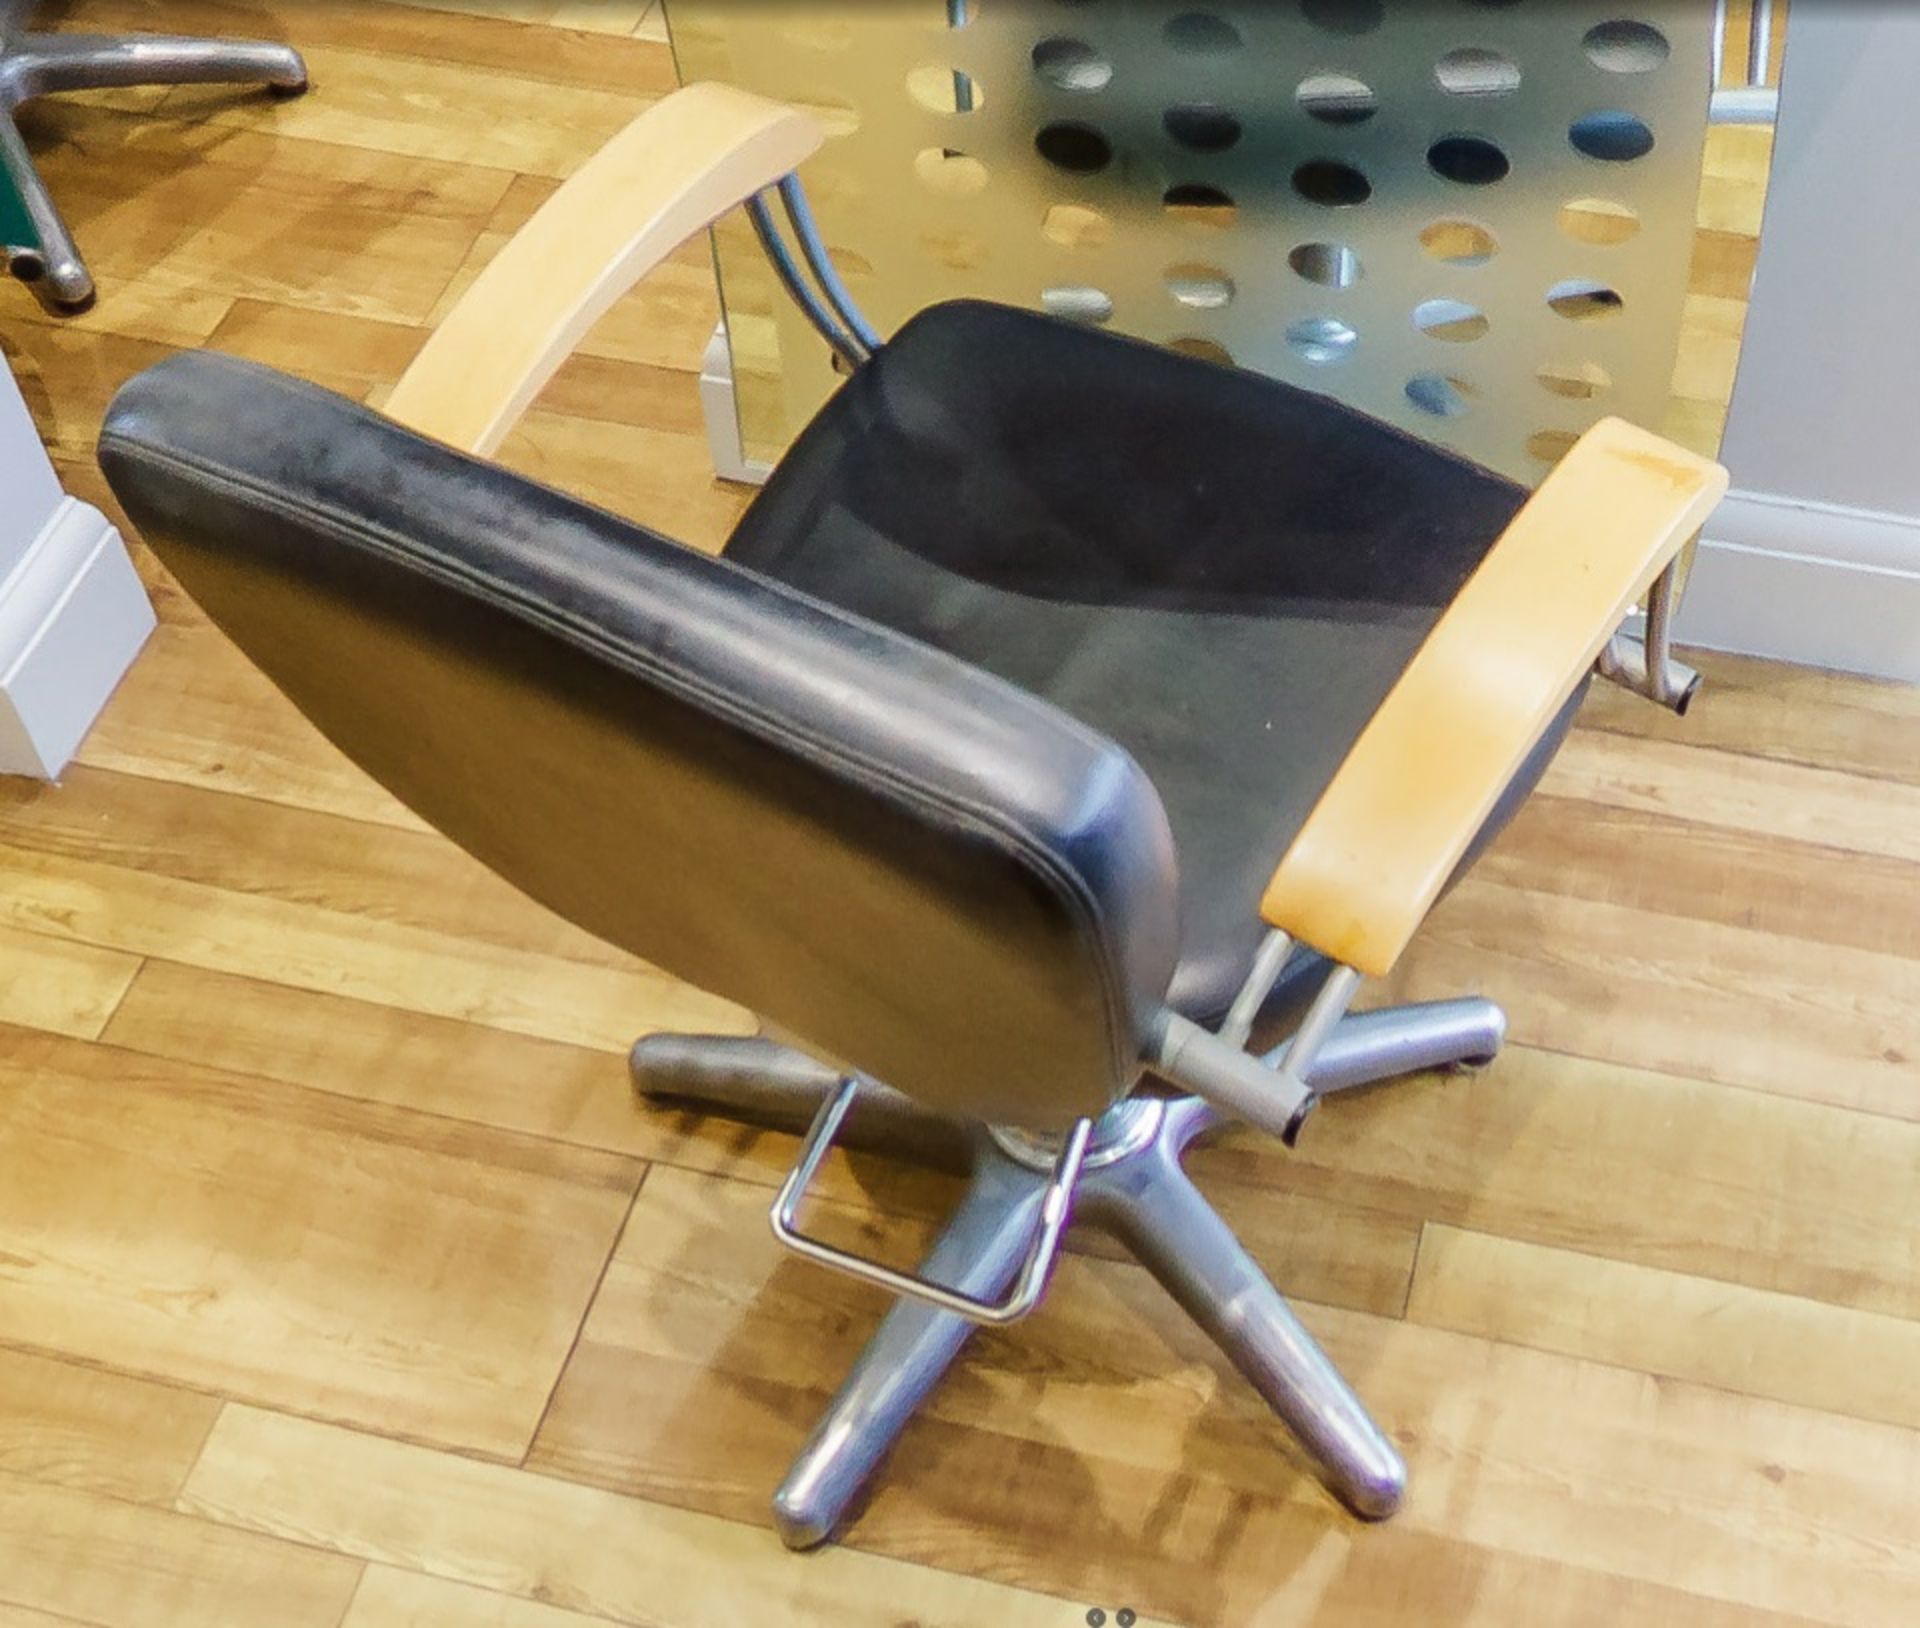 1 x Adjustable Black Hydraulic Barber Hairdressing Chair - Recently Removed From A Boutique Hair - Image 11 of 11